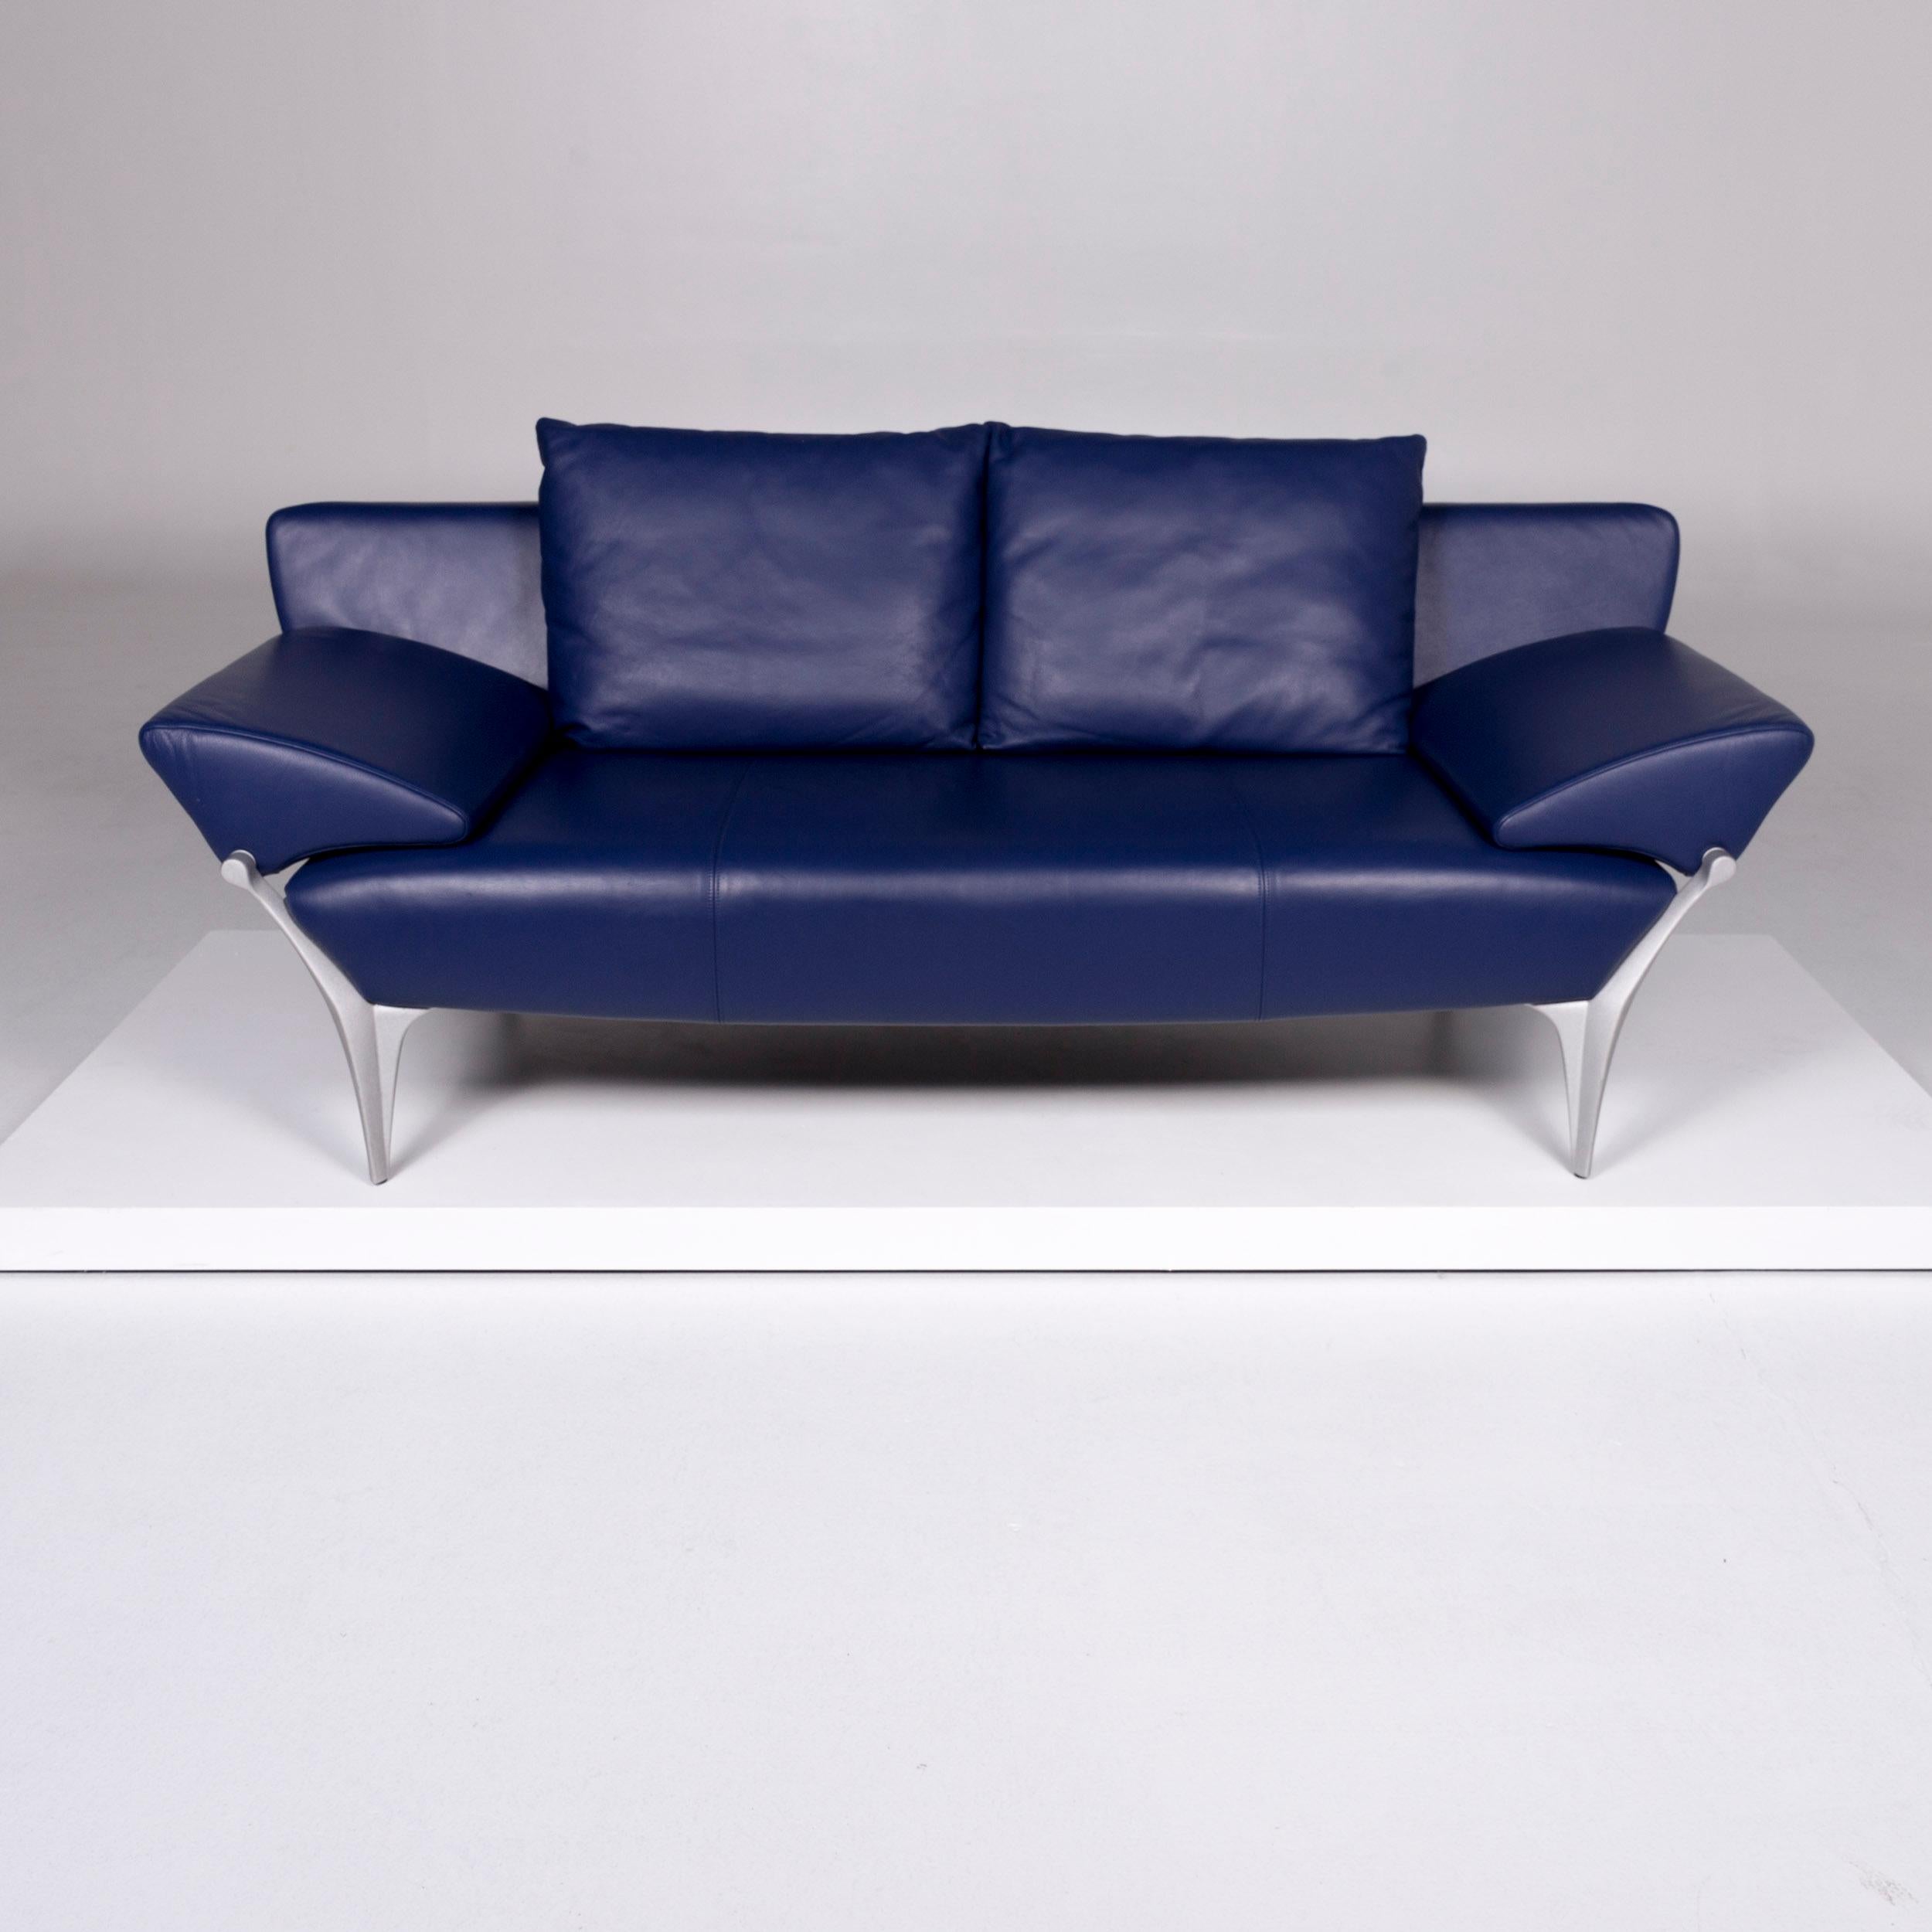 Rolf Benz 1600 Leder Sofa Blau Zweisitzer Couch In Good Condition For Sale In Cologne, DE